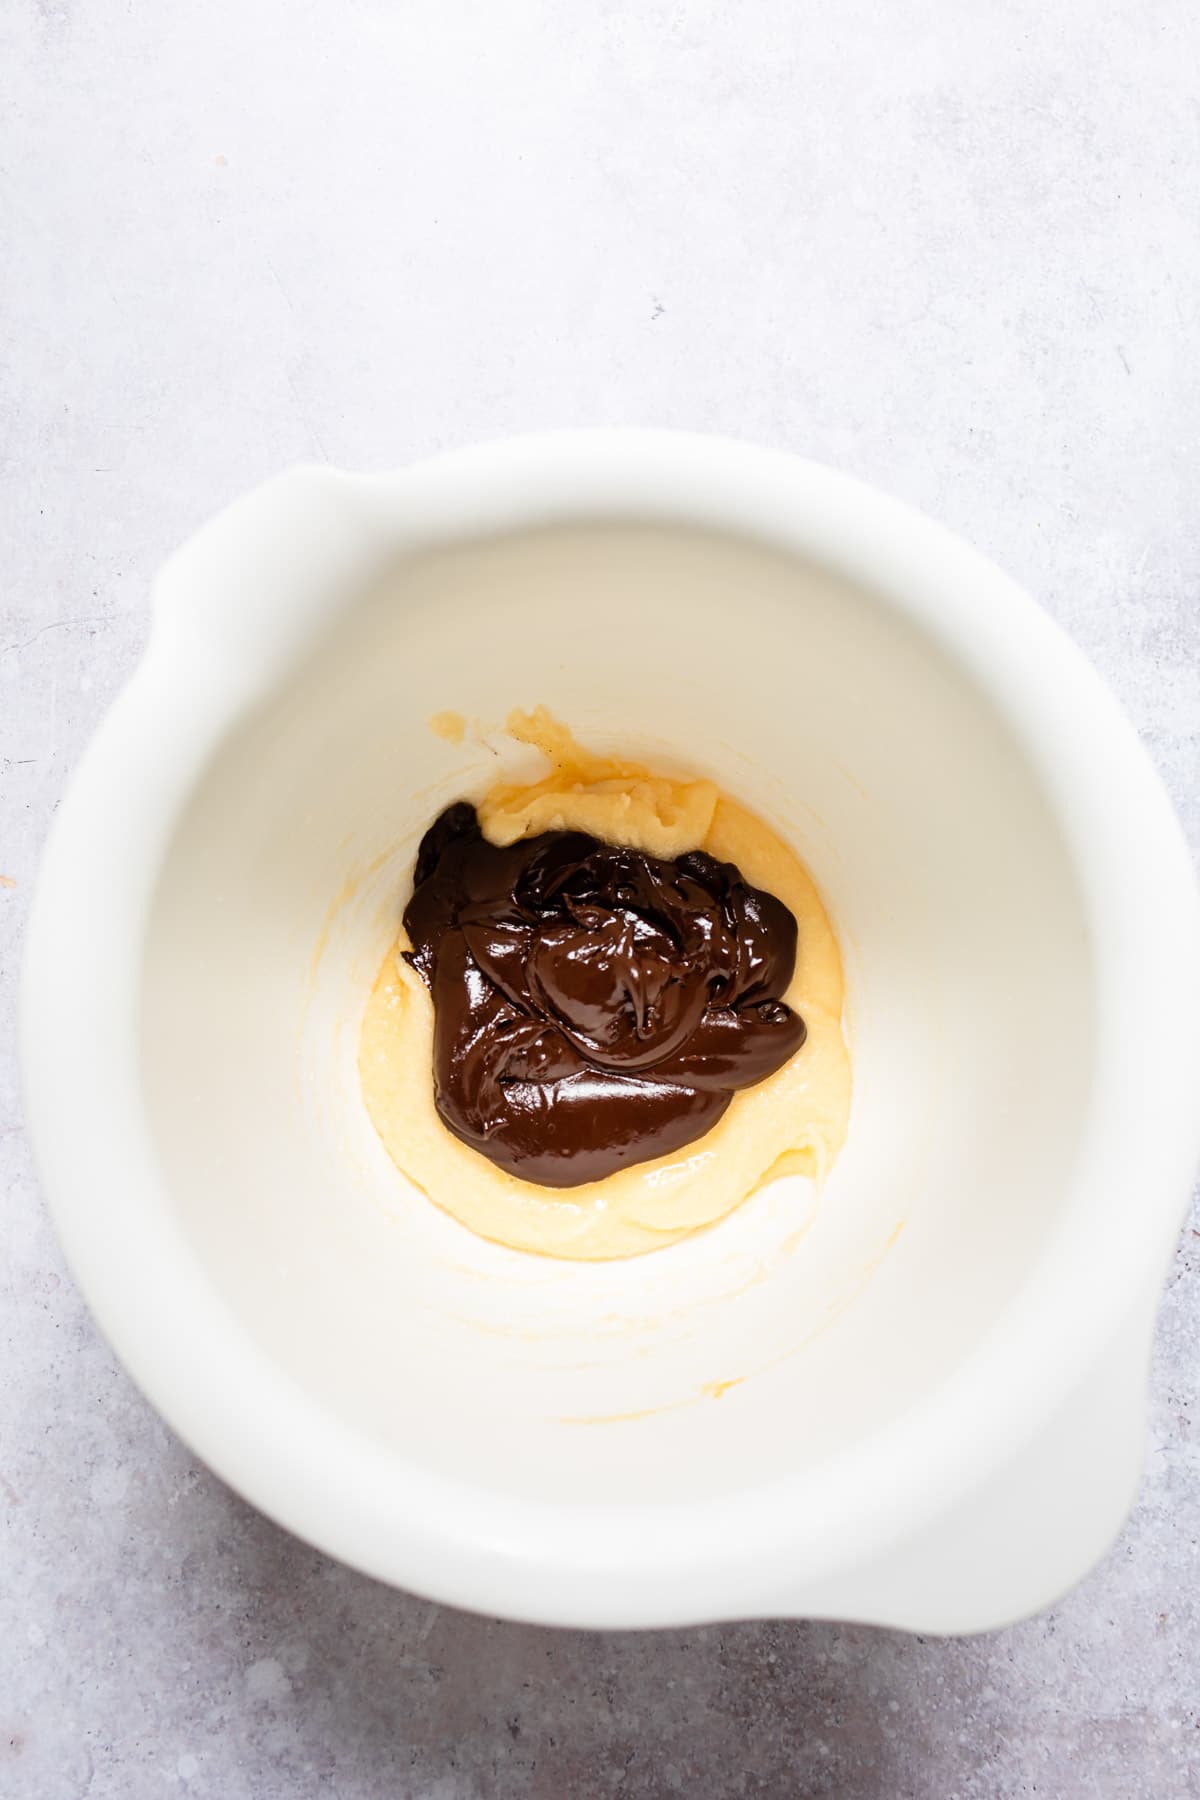 Melted chocolate mixture with egg yolk mixture. 